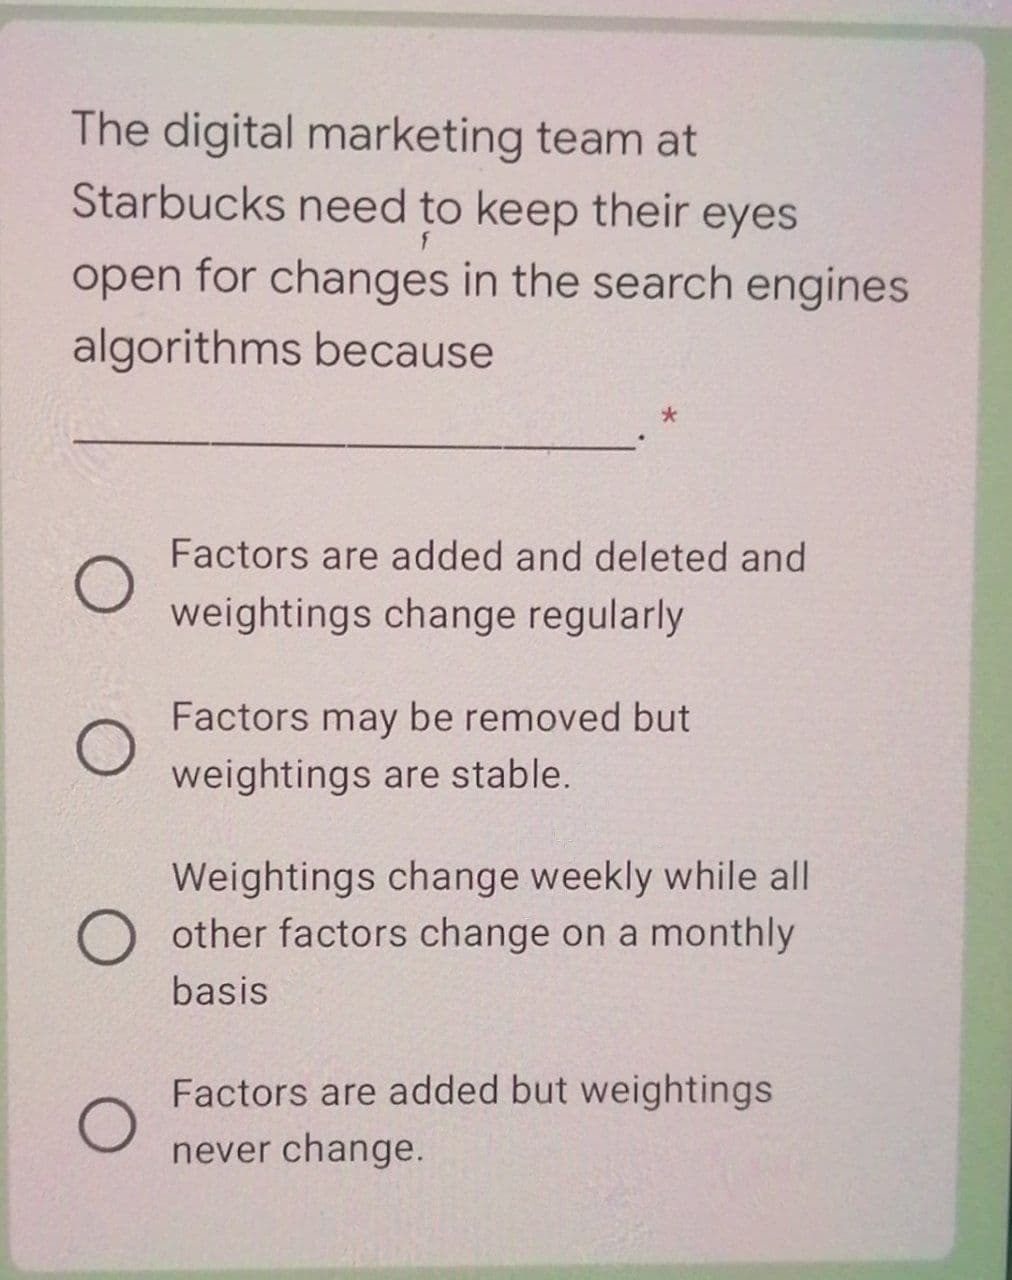 The digital marketing team at
Starbucks need to keep their eyes
open for changes in the search engines
algorithms because
Factors are added and deleted and
weightings change regularly
Factors may be removed but
weightings are stable.
Weightings change weekly while all
other factors change on a monthly
basis
Factors are added but weightings
never change.
